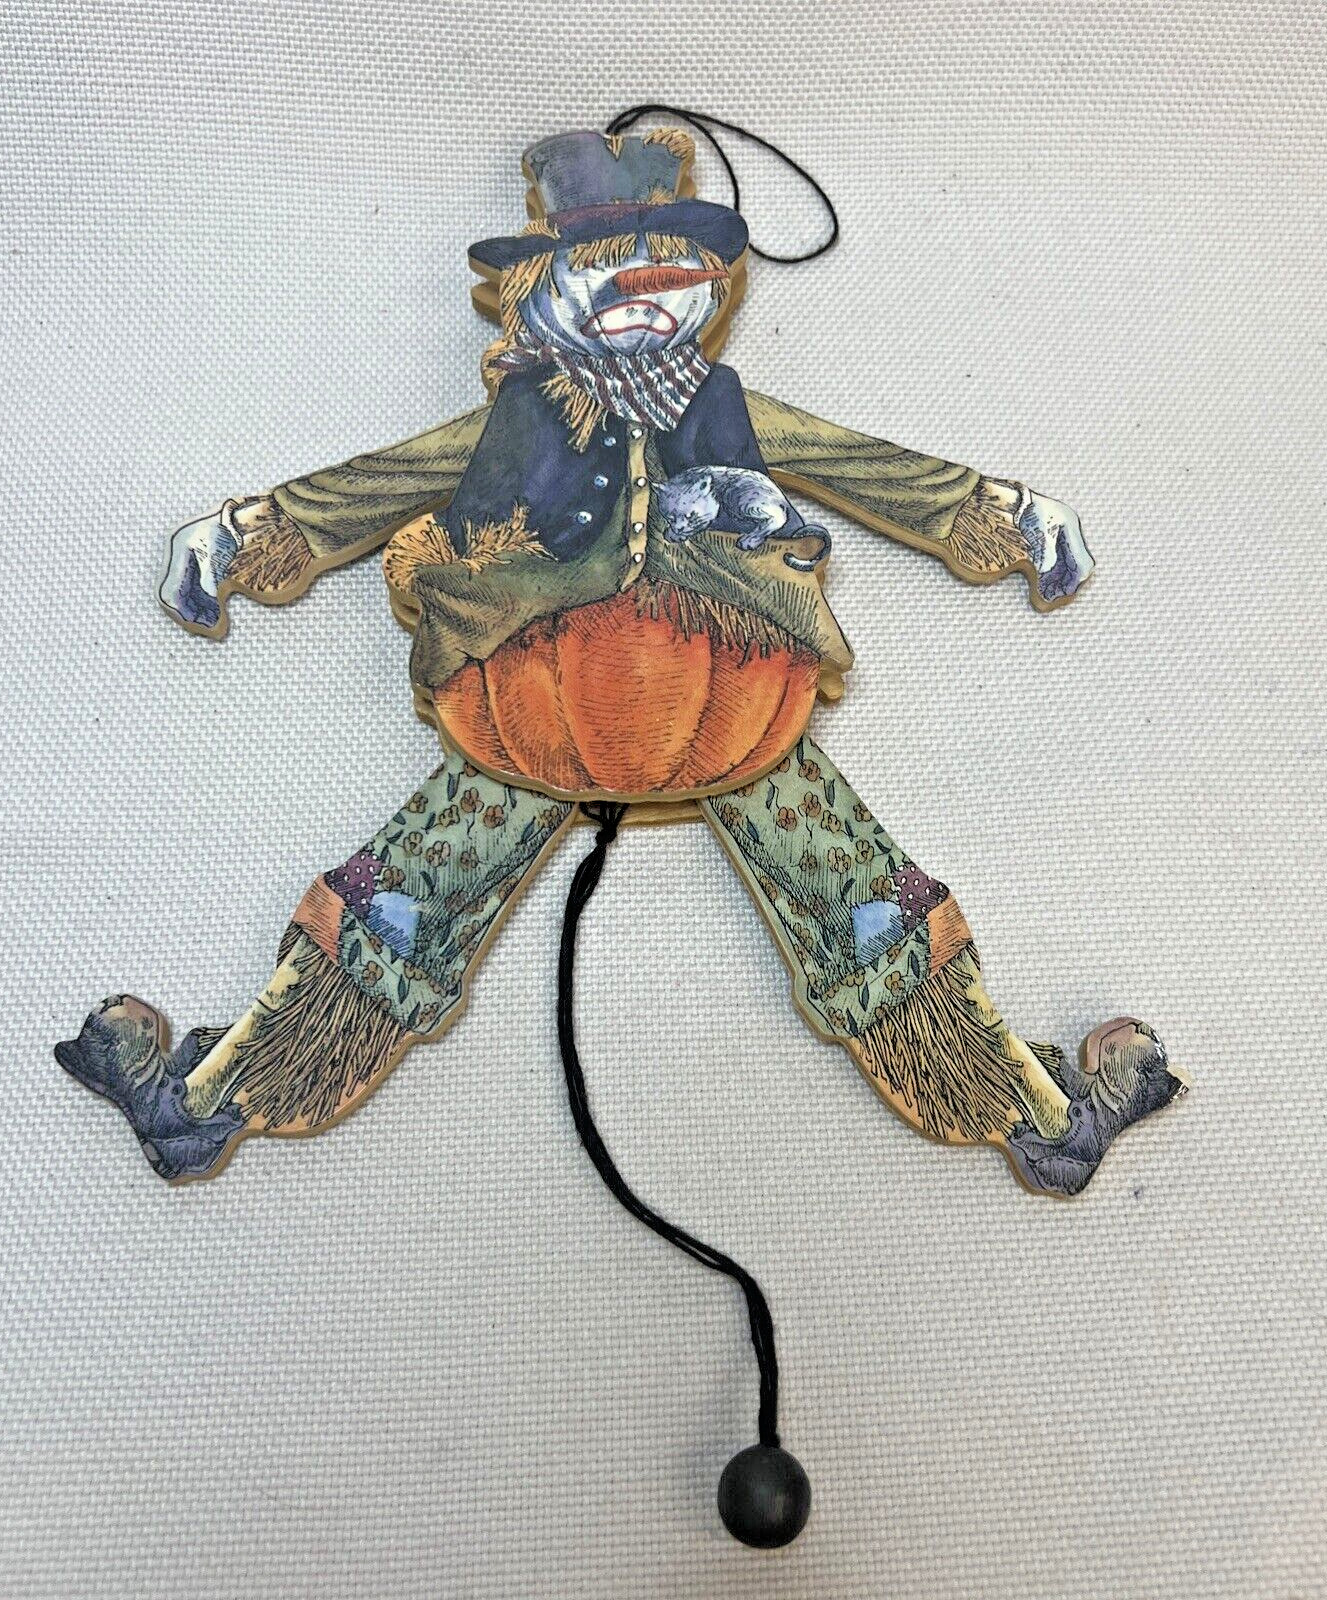 Vintage Halloween Pumpkin Wood Pull String Jumping Jack Scarecrow 2 sided 80's